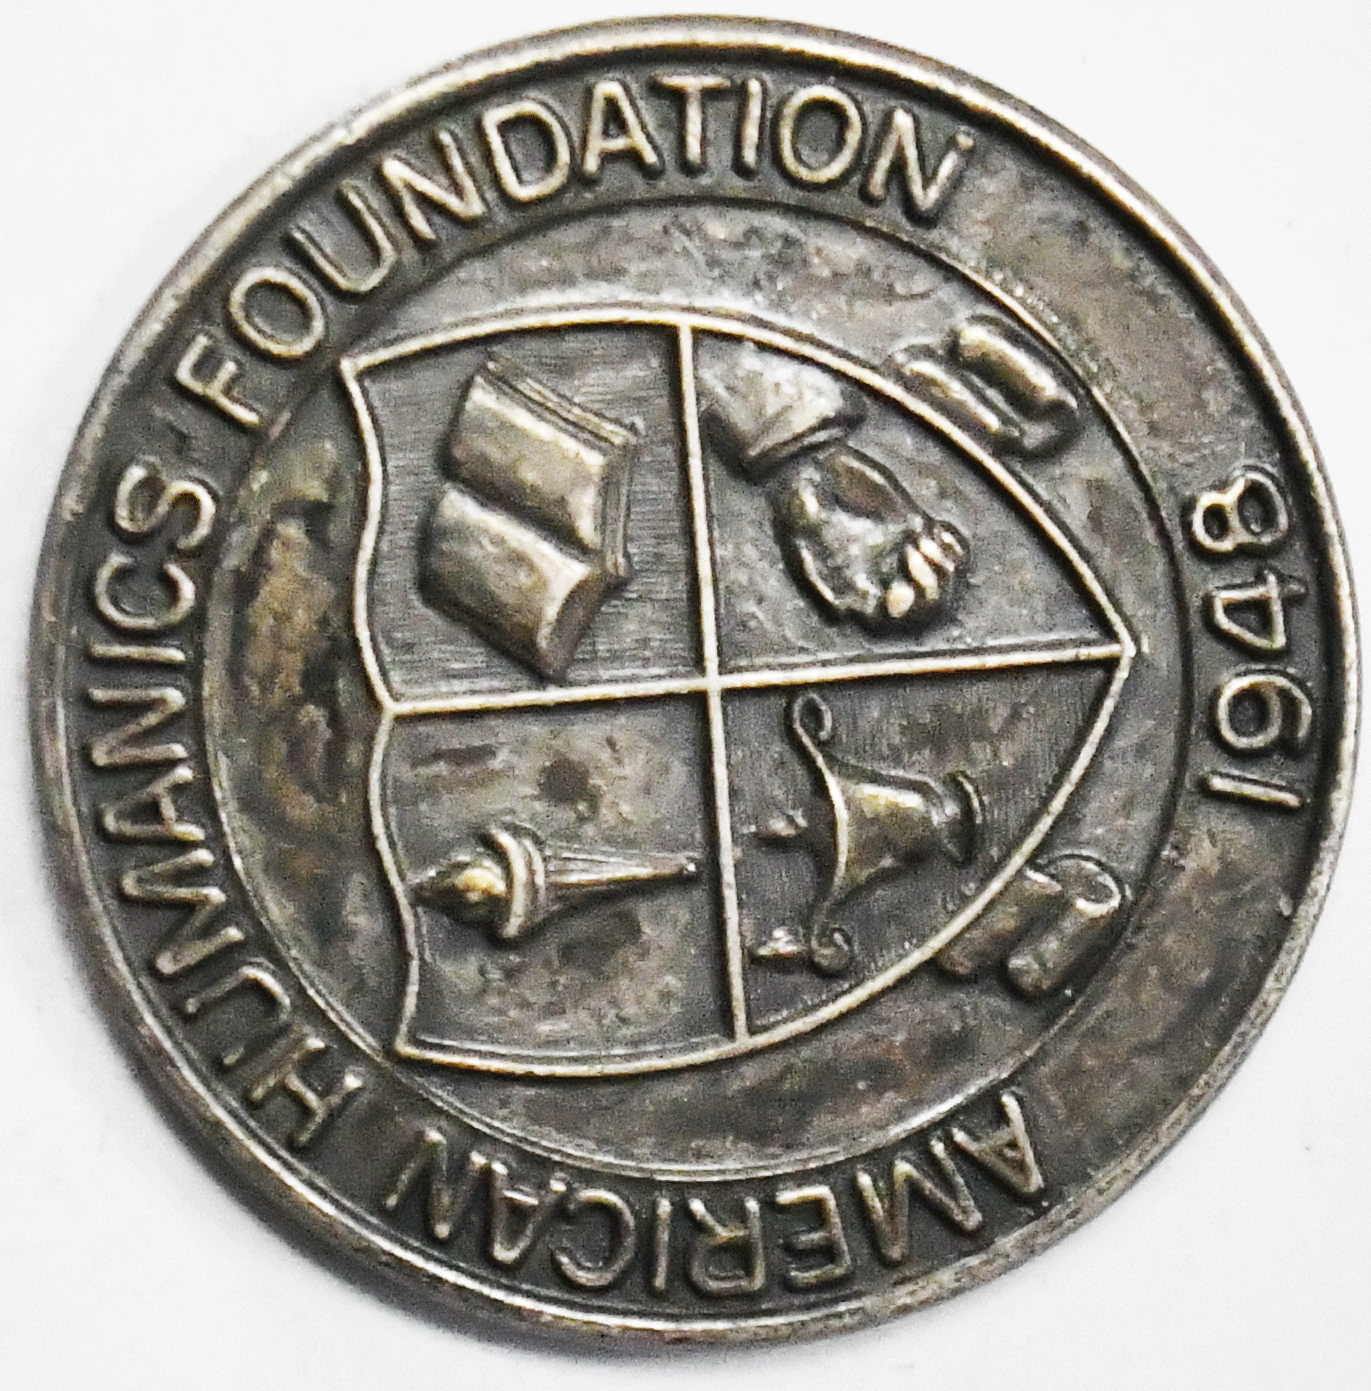 American Humanics Foundation 1948 Founders Banquet November 20 1965 Medal 32mm